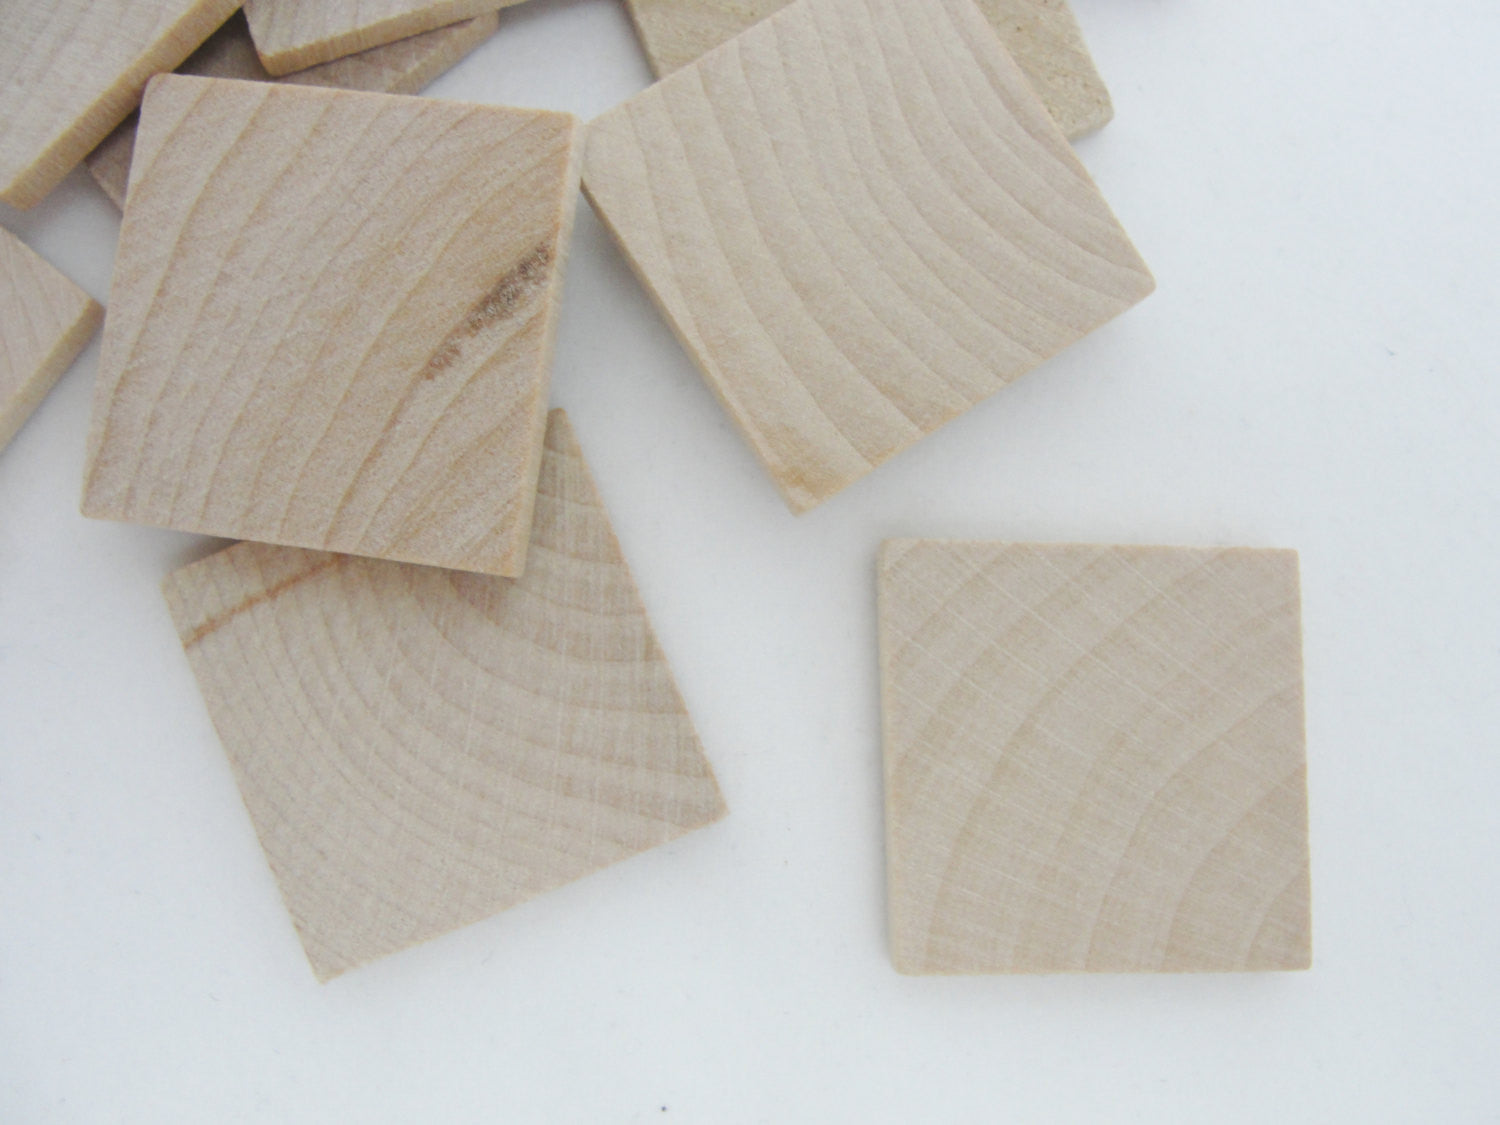 Wooden square tiles 1 inch (1") square 1/8" thick - Wood parts - Craft Supply House